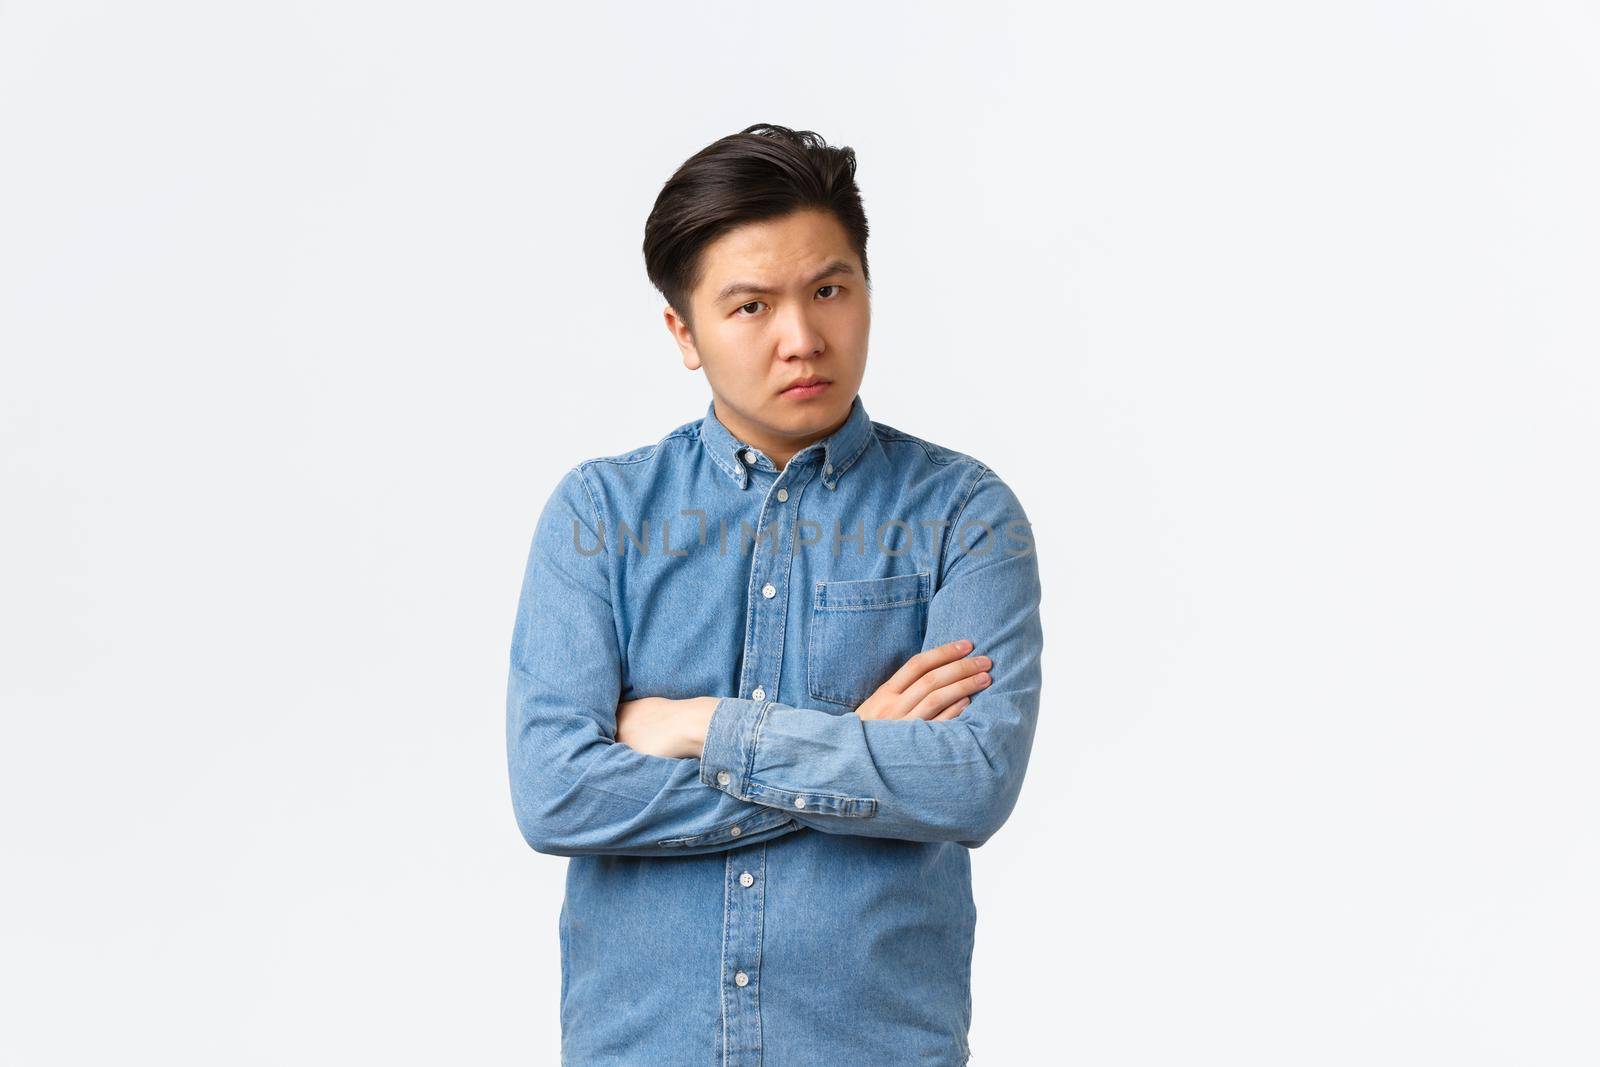 Skeptical and judgemental serious asian man standing with arms crossed and looking disappointed at camera, scolding someone bad behaviour, frowning upset, standing white background.